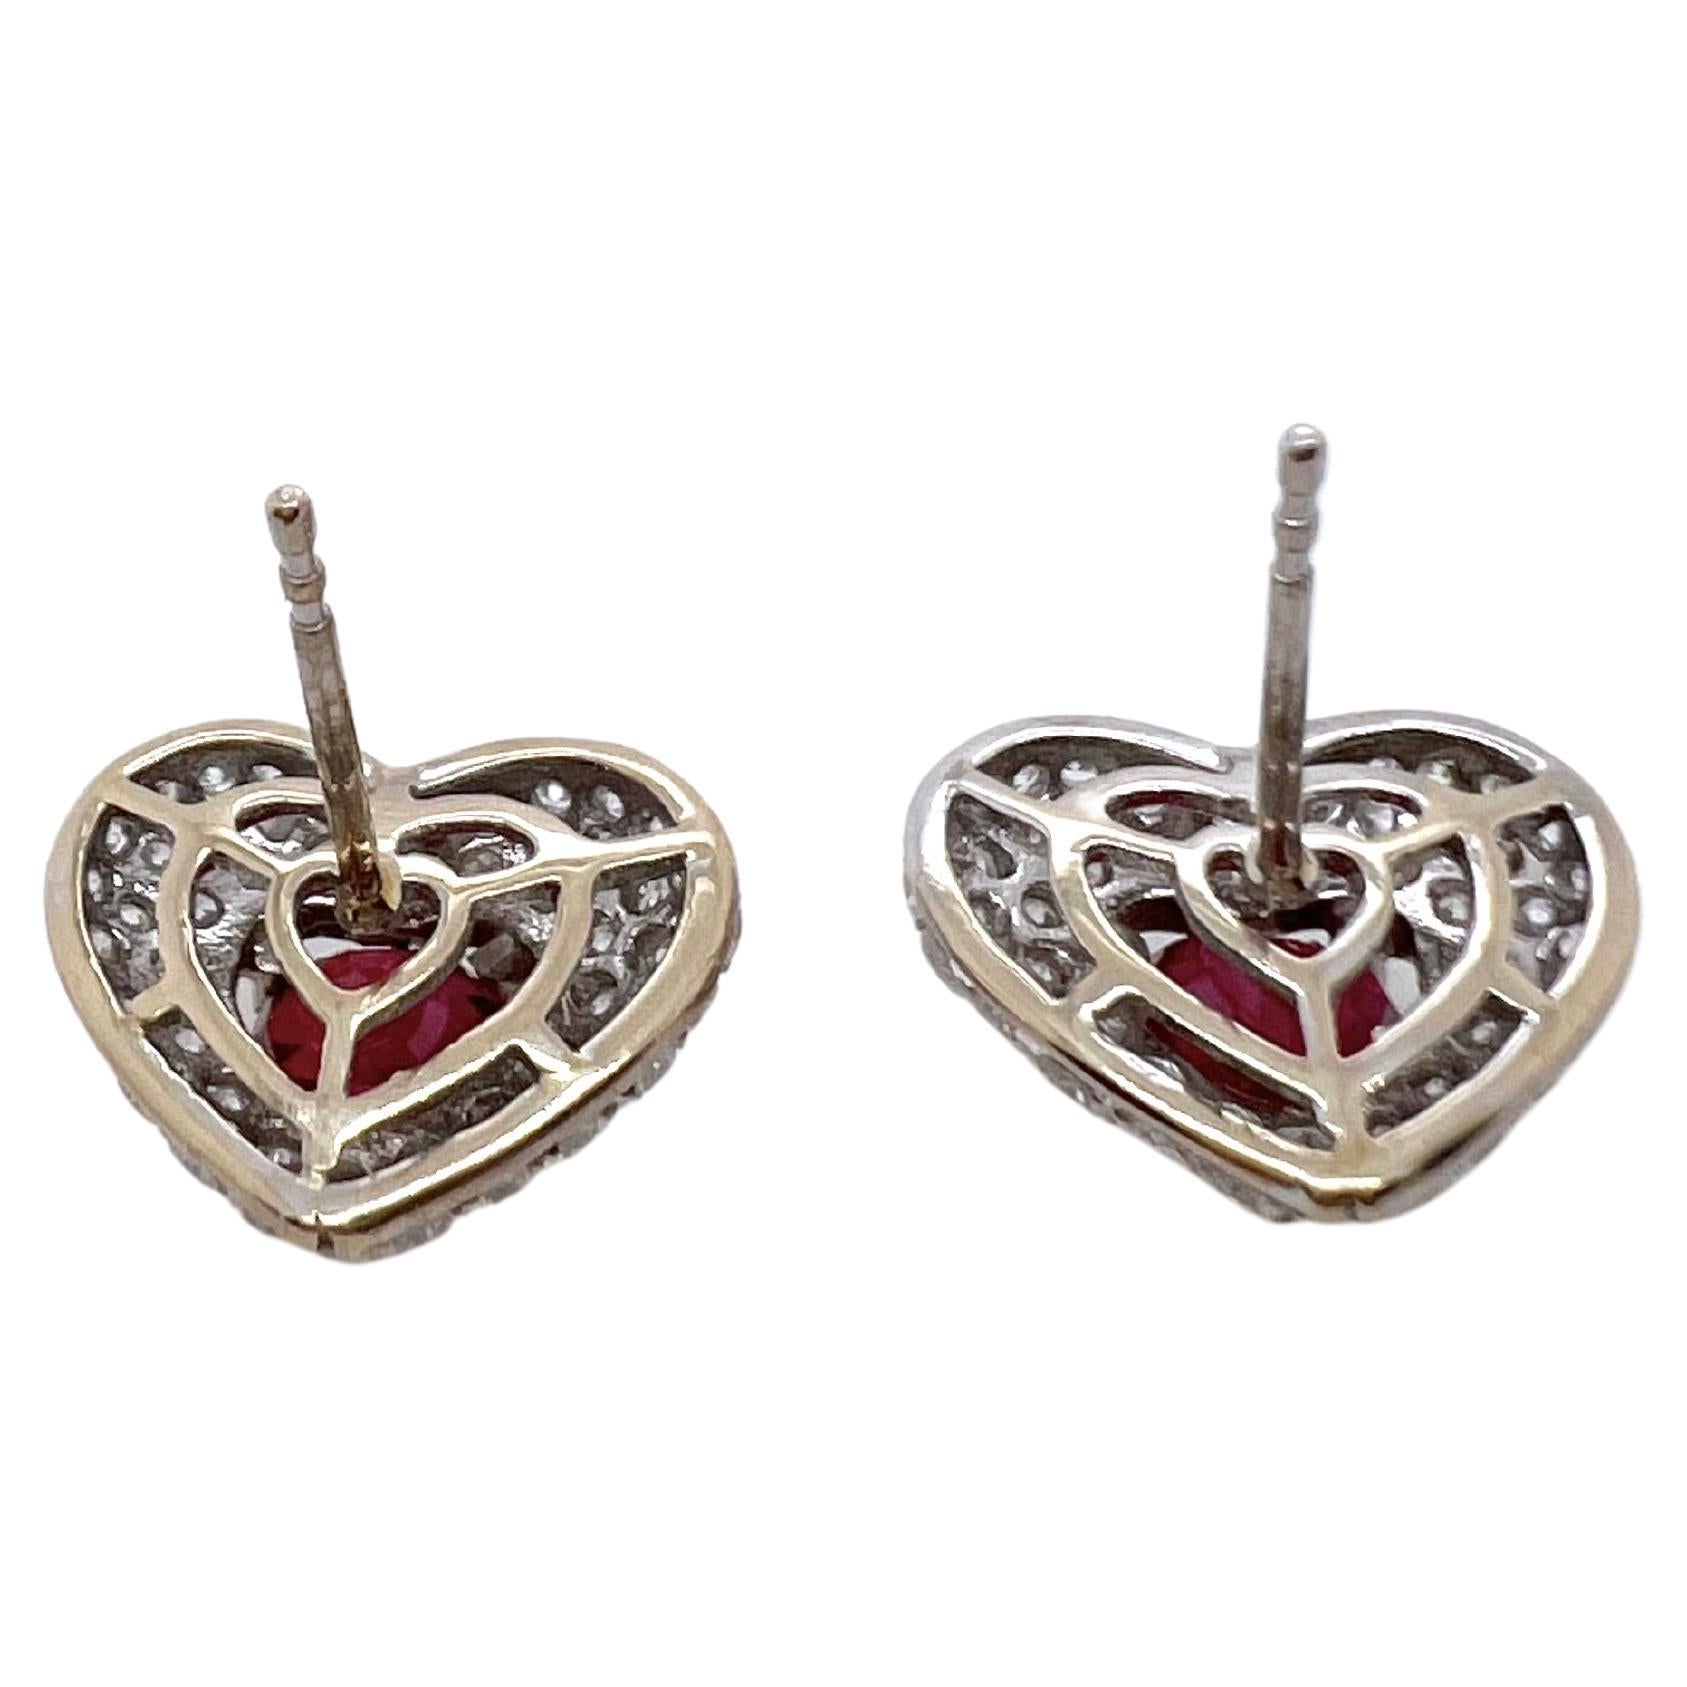 This gorgeous pair of heart shaped rubies are set in a custom made 18k white gold diamond setting.  The heart shaped frame further accentuates the beautiful heart shaped rubies.  Definitely different than your classic studs, that will grasp